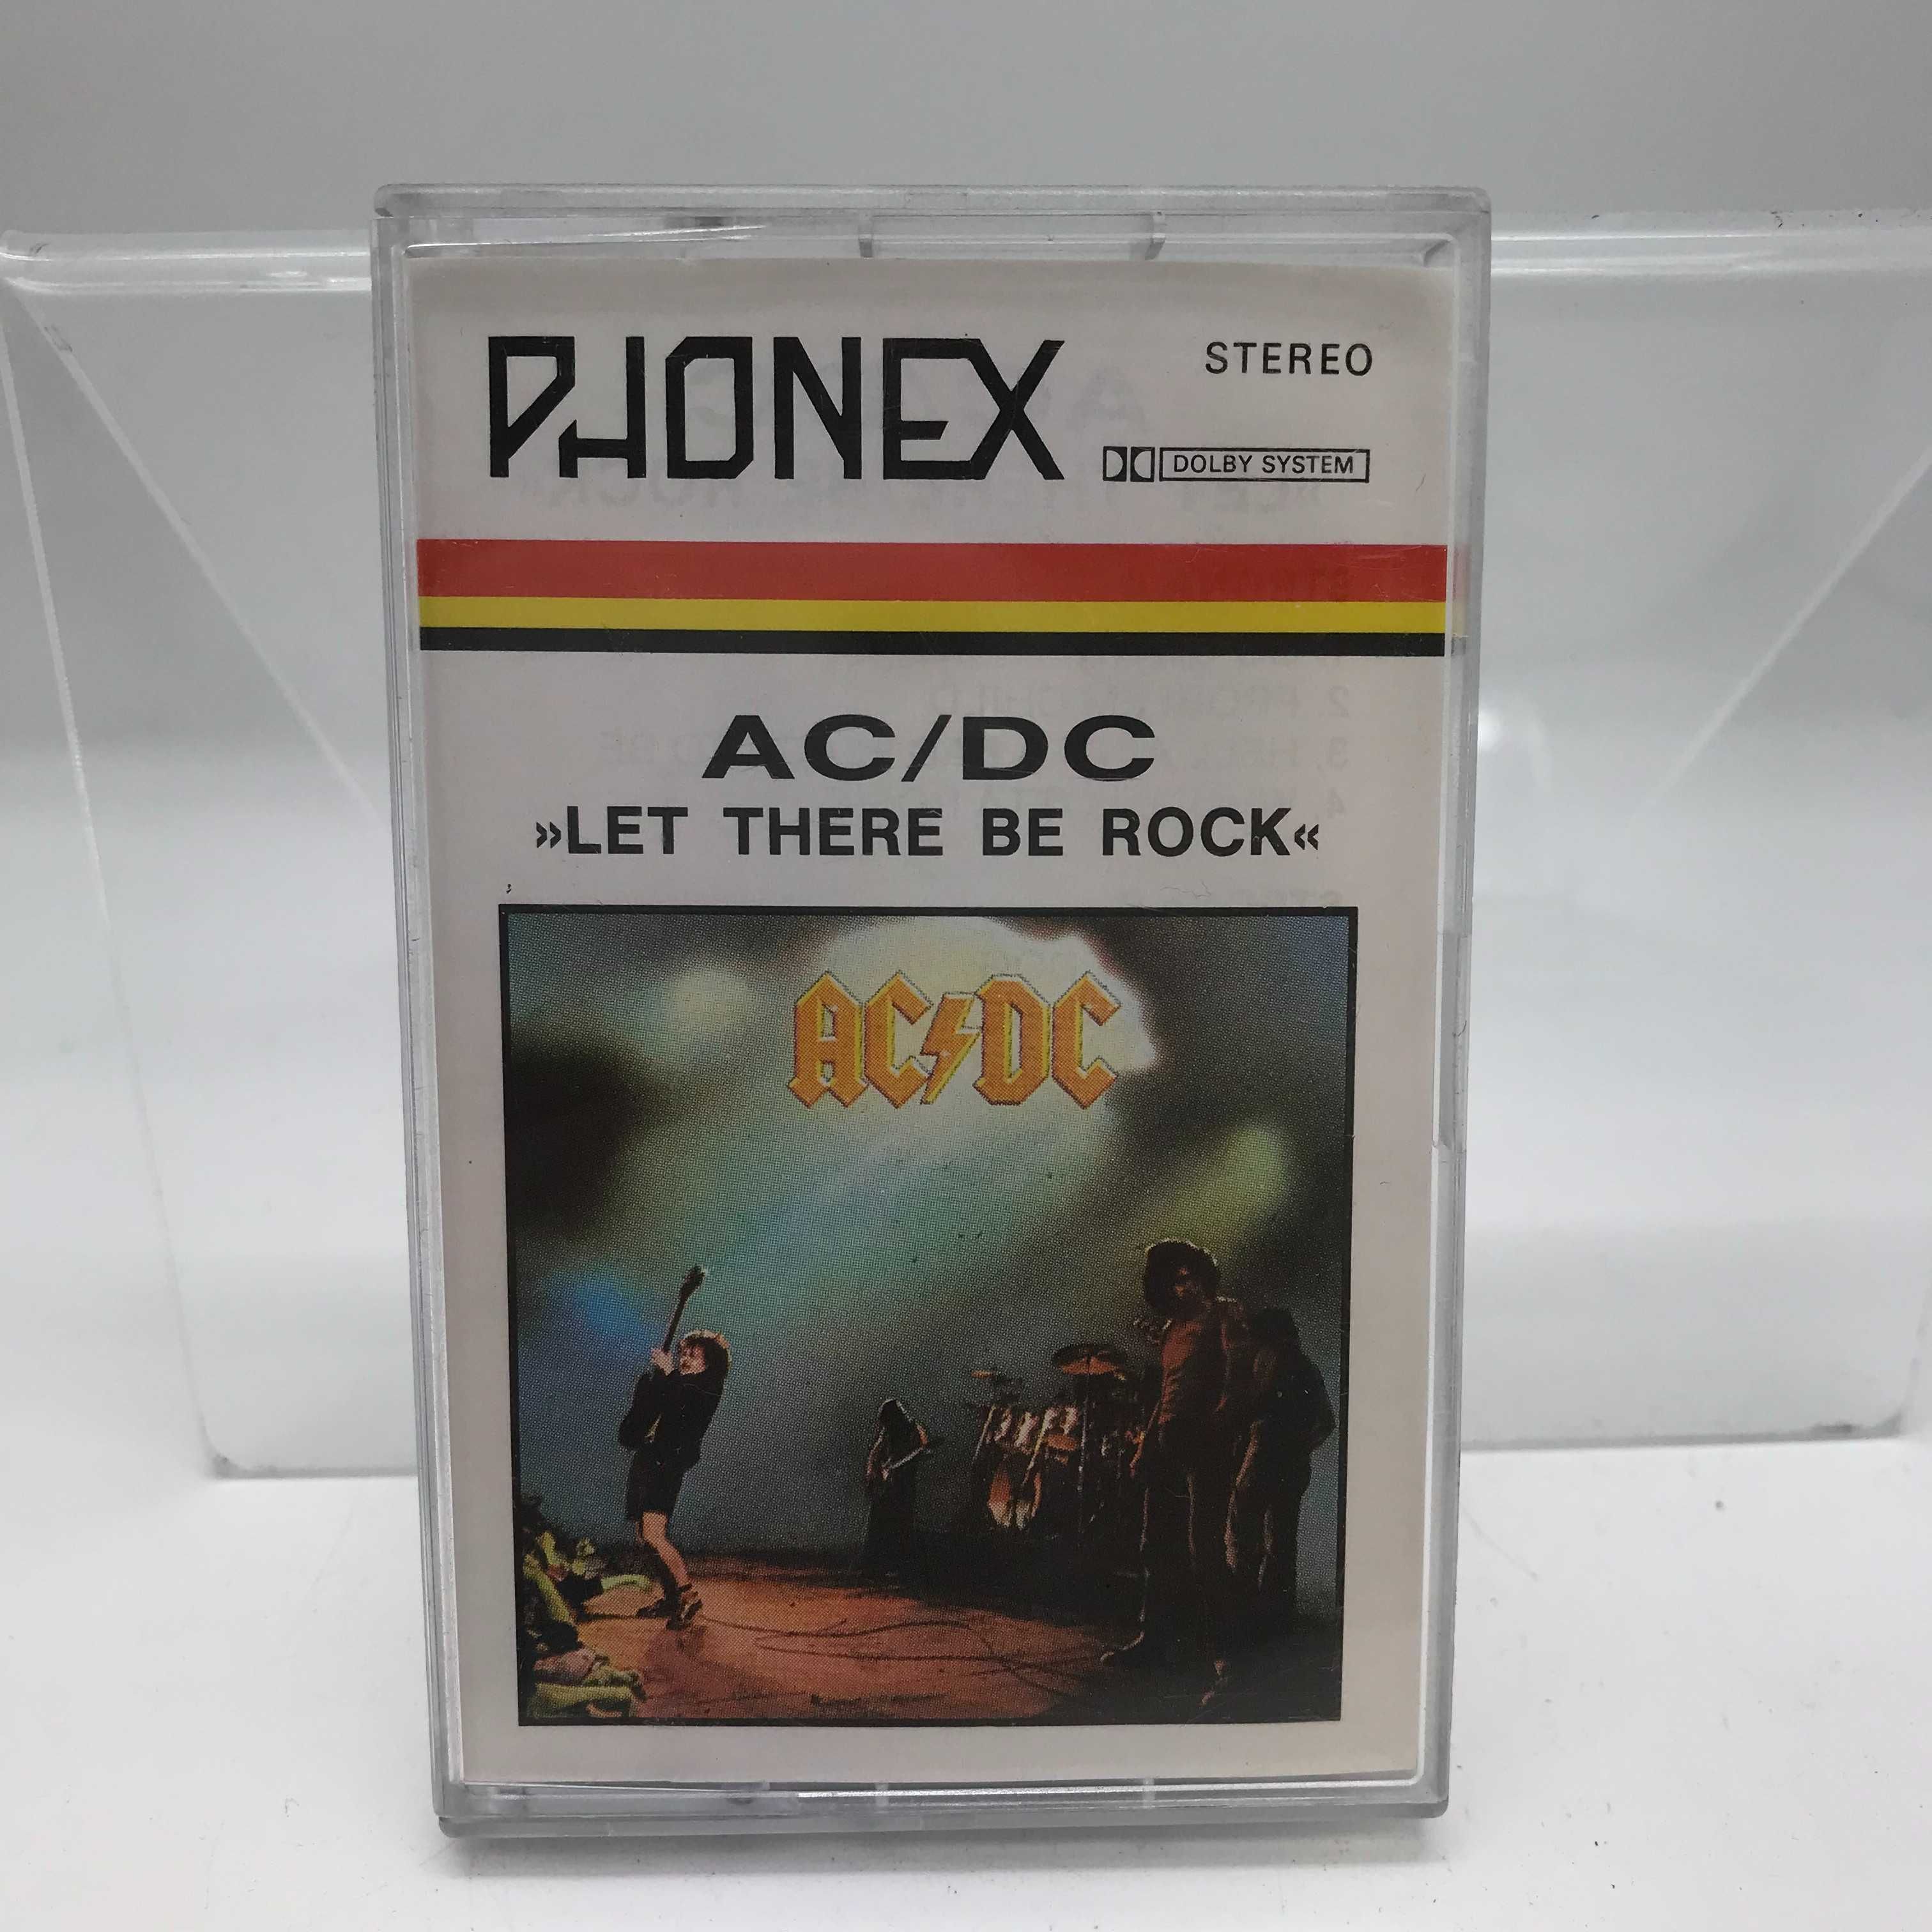 kaseta ac/dc - let there be rock (675)